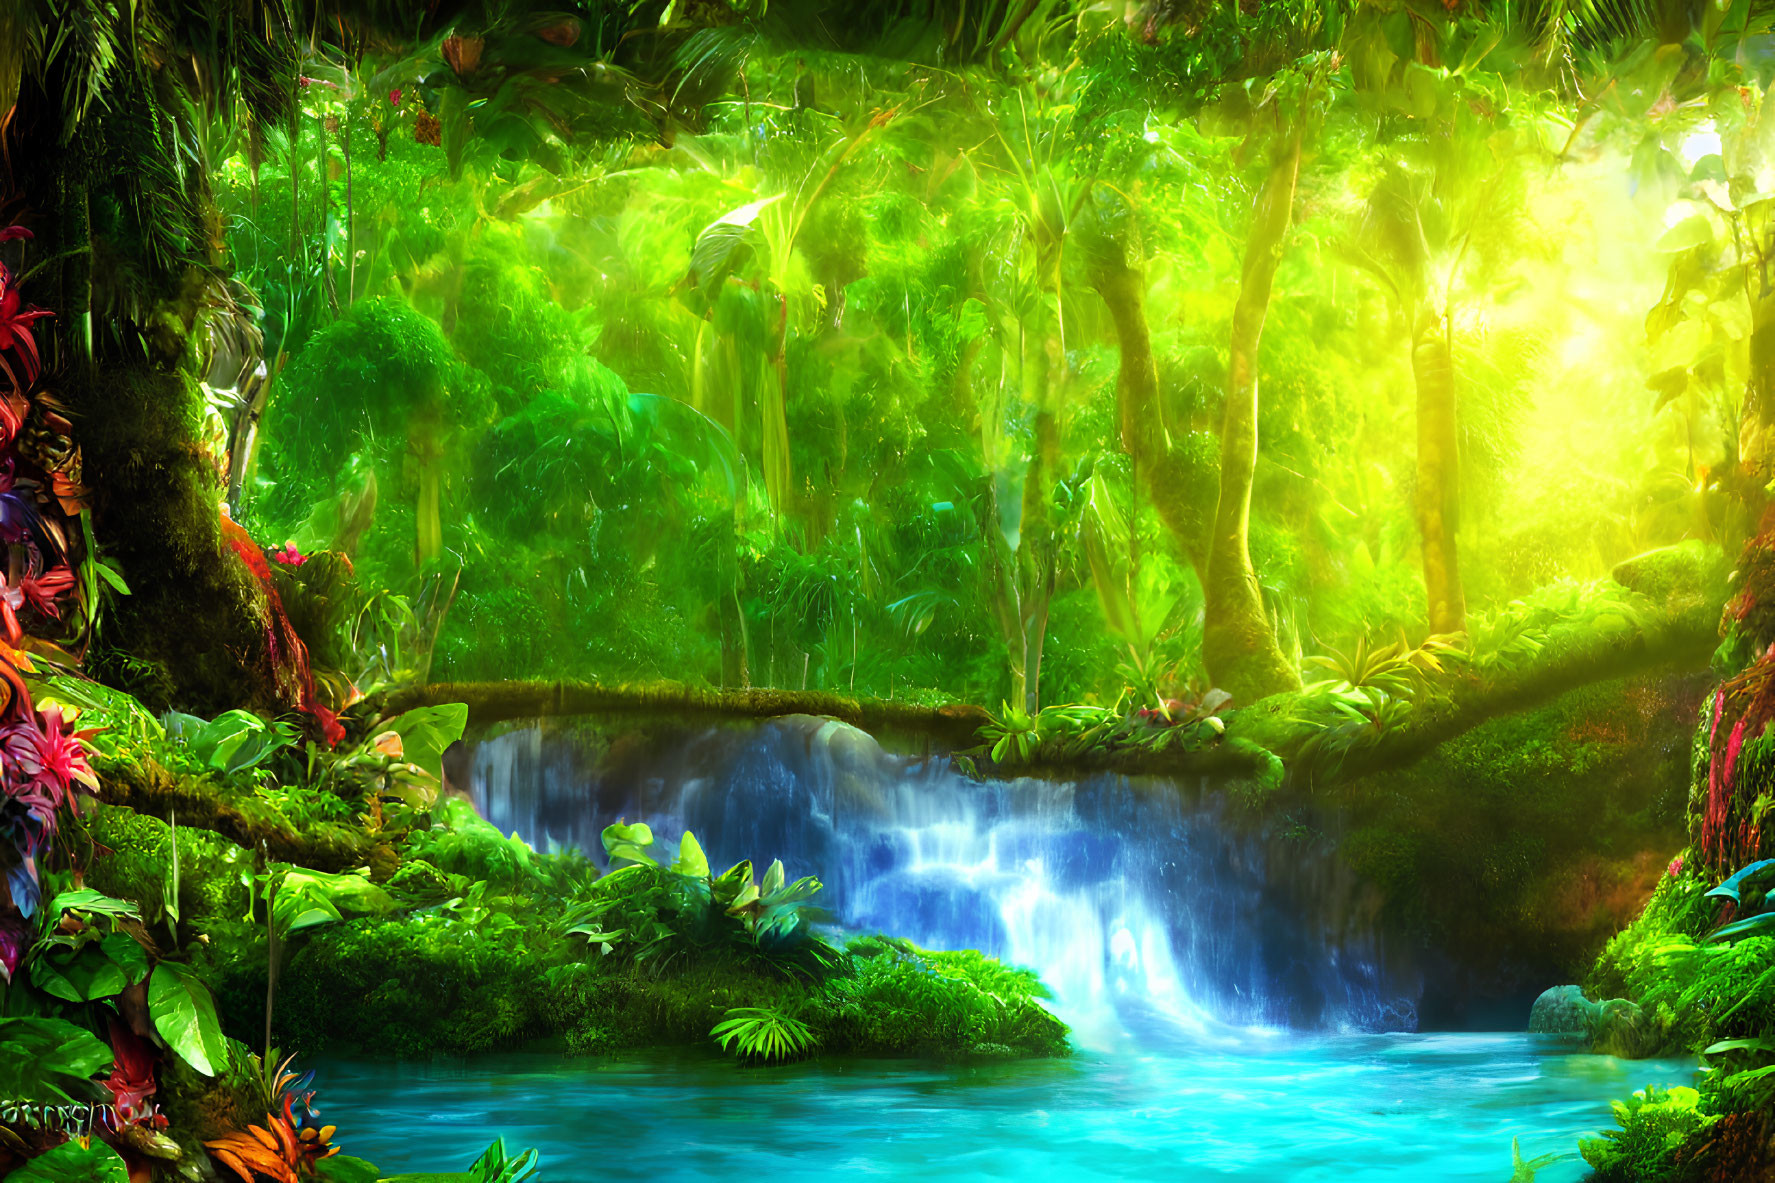 Tropical jungle scene with vibrant vegetation and sunlit waterfall